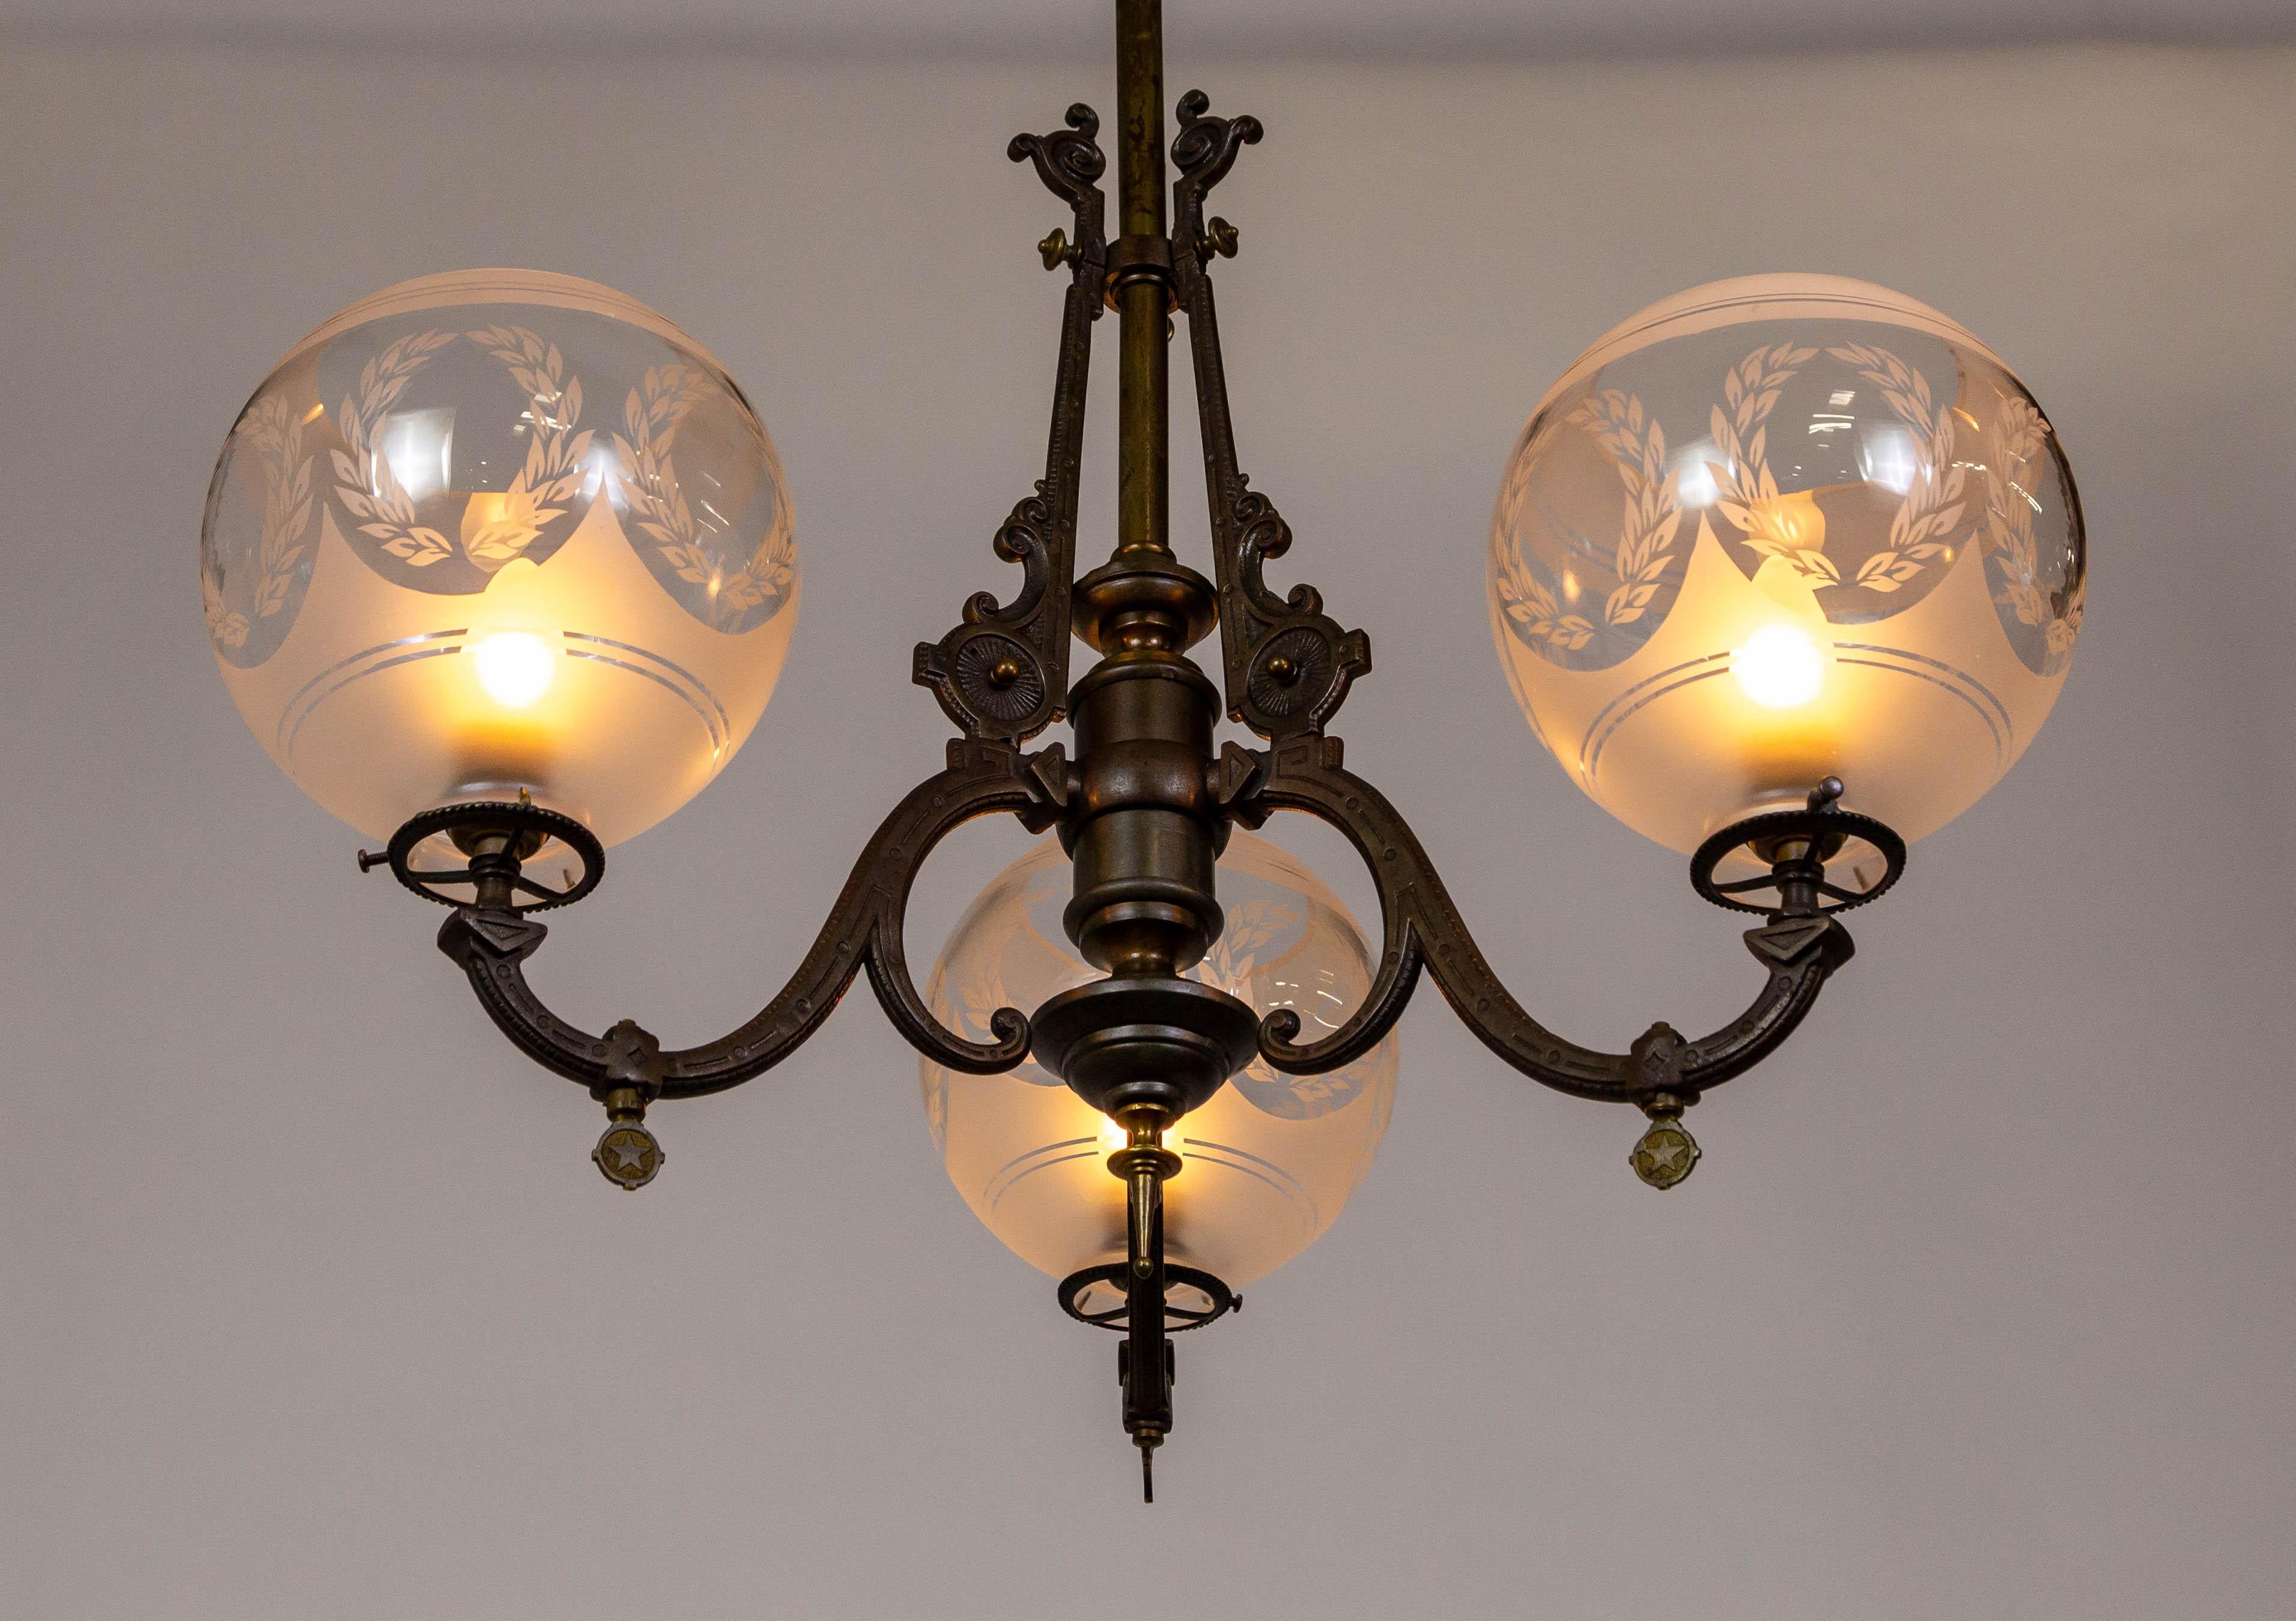 A finely cast, iron and brass Arts & Crafts chandelier with refined, geometric details and Eastlake styling.  This late 19th-century chandelier was formerly gas-lit and has been newly rewired.  The structure has a rich, dark patina and holds three